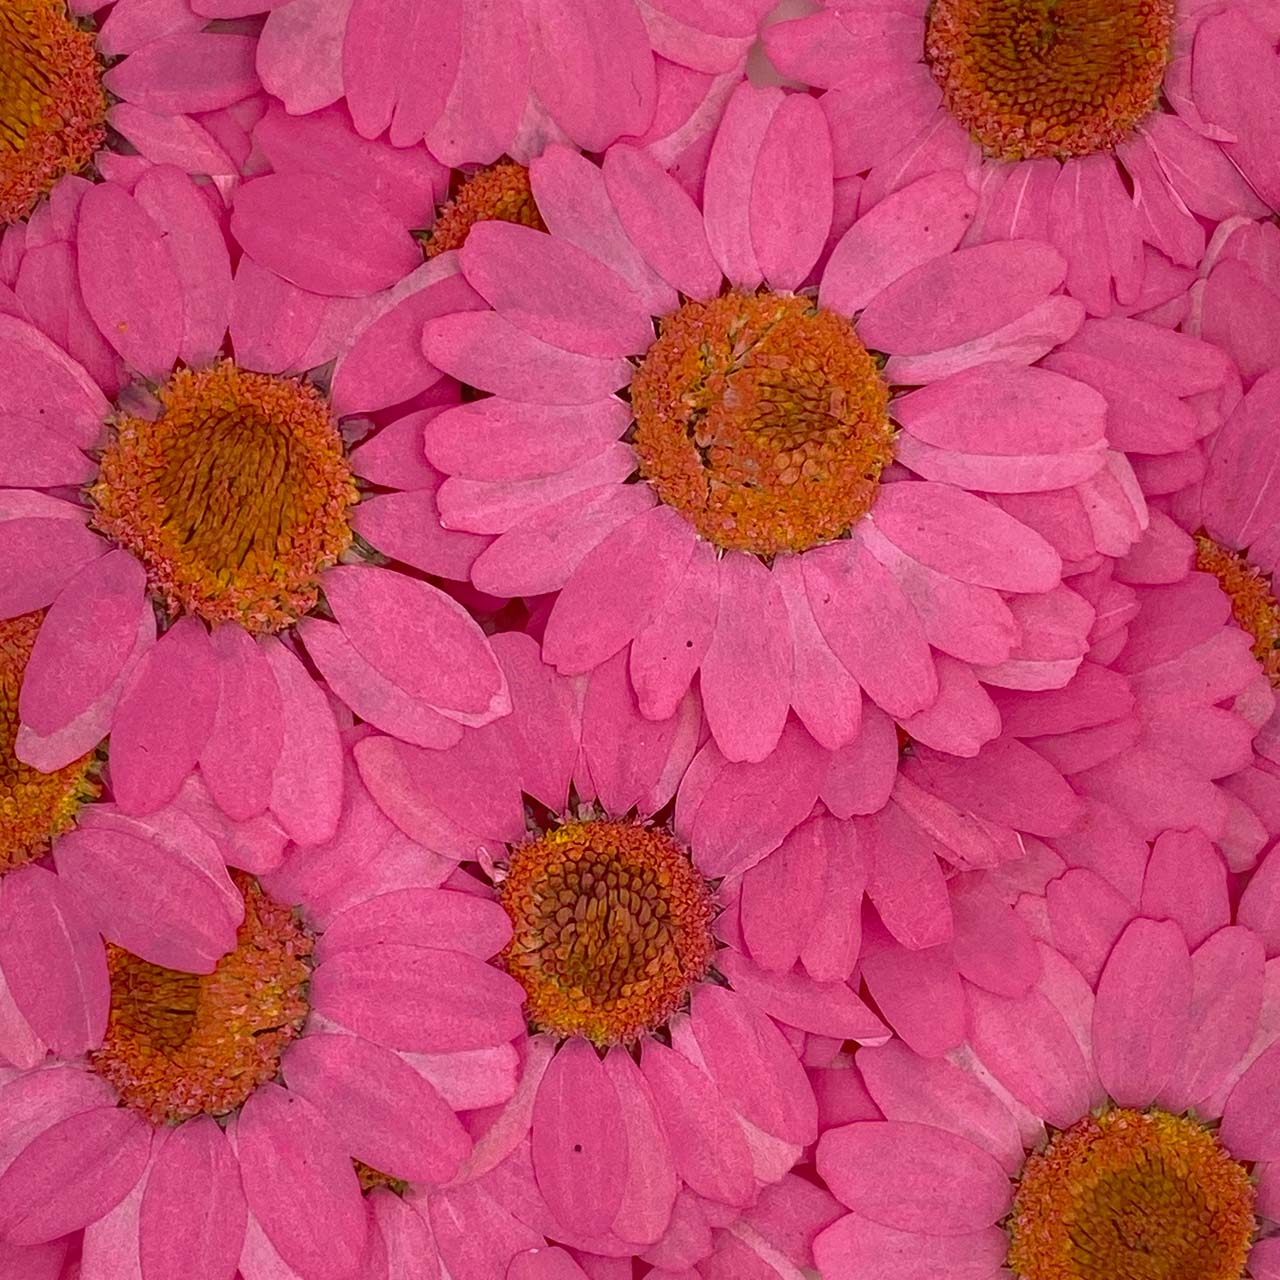 Close-up shot of bright pink daisy flowers.